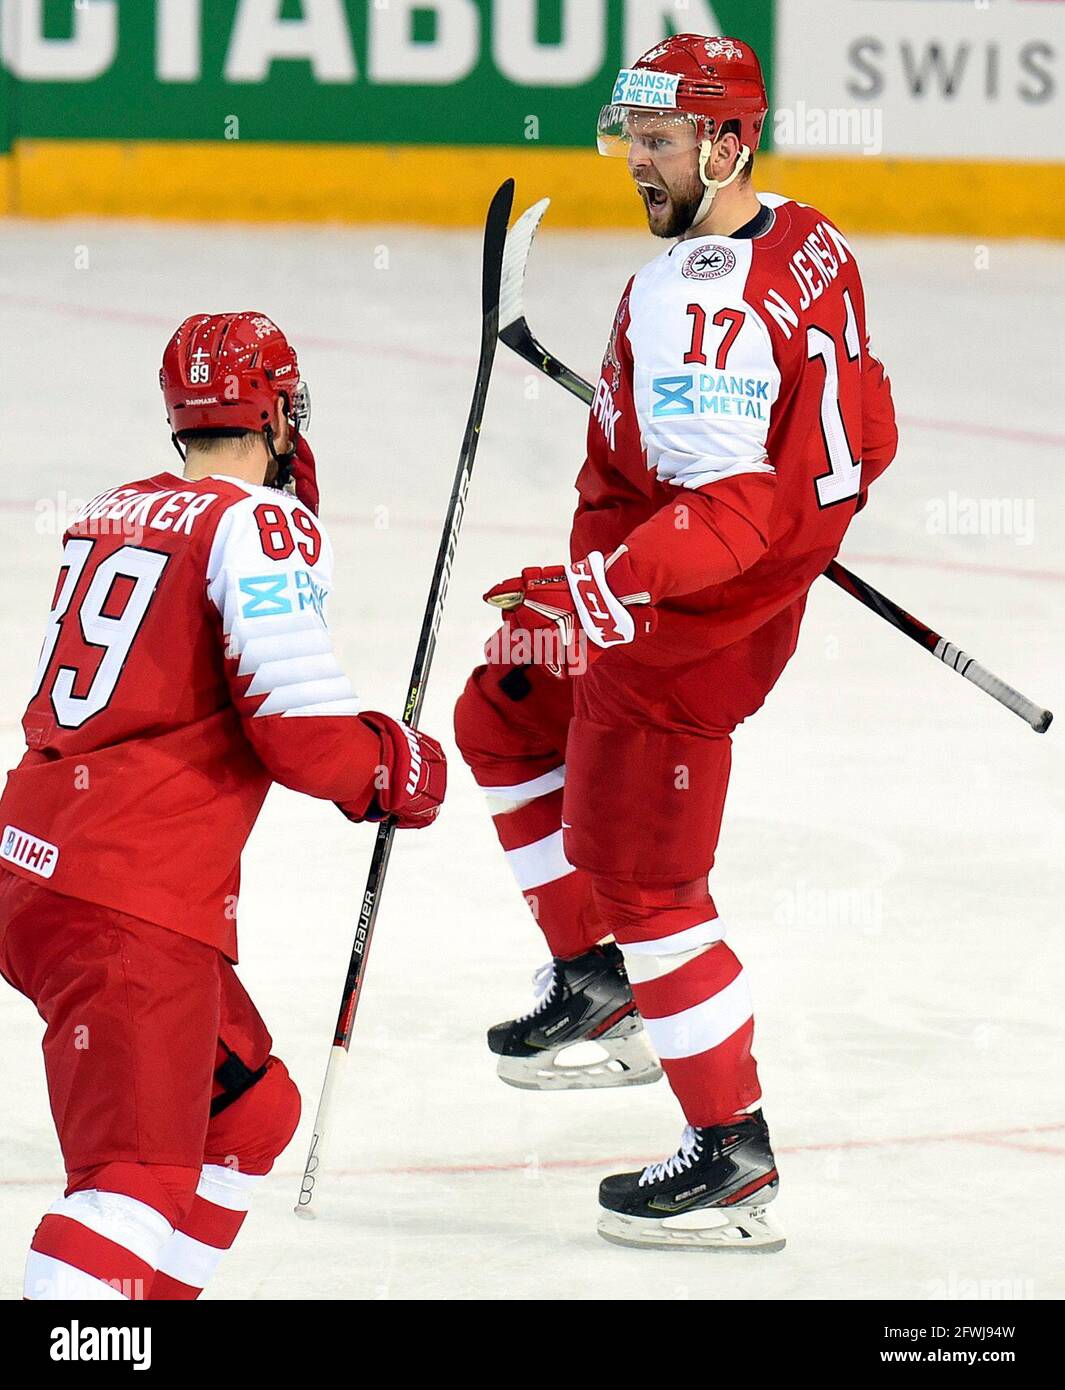 Riga, Latvia. 22nd May, 2021. Denmark's forward Nicklas Jensen (R) during  the Group A match between Denmark and Sweden at the 2021 IIHF Ice Hockey  World Championship in Riga, Latvia, May 22,